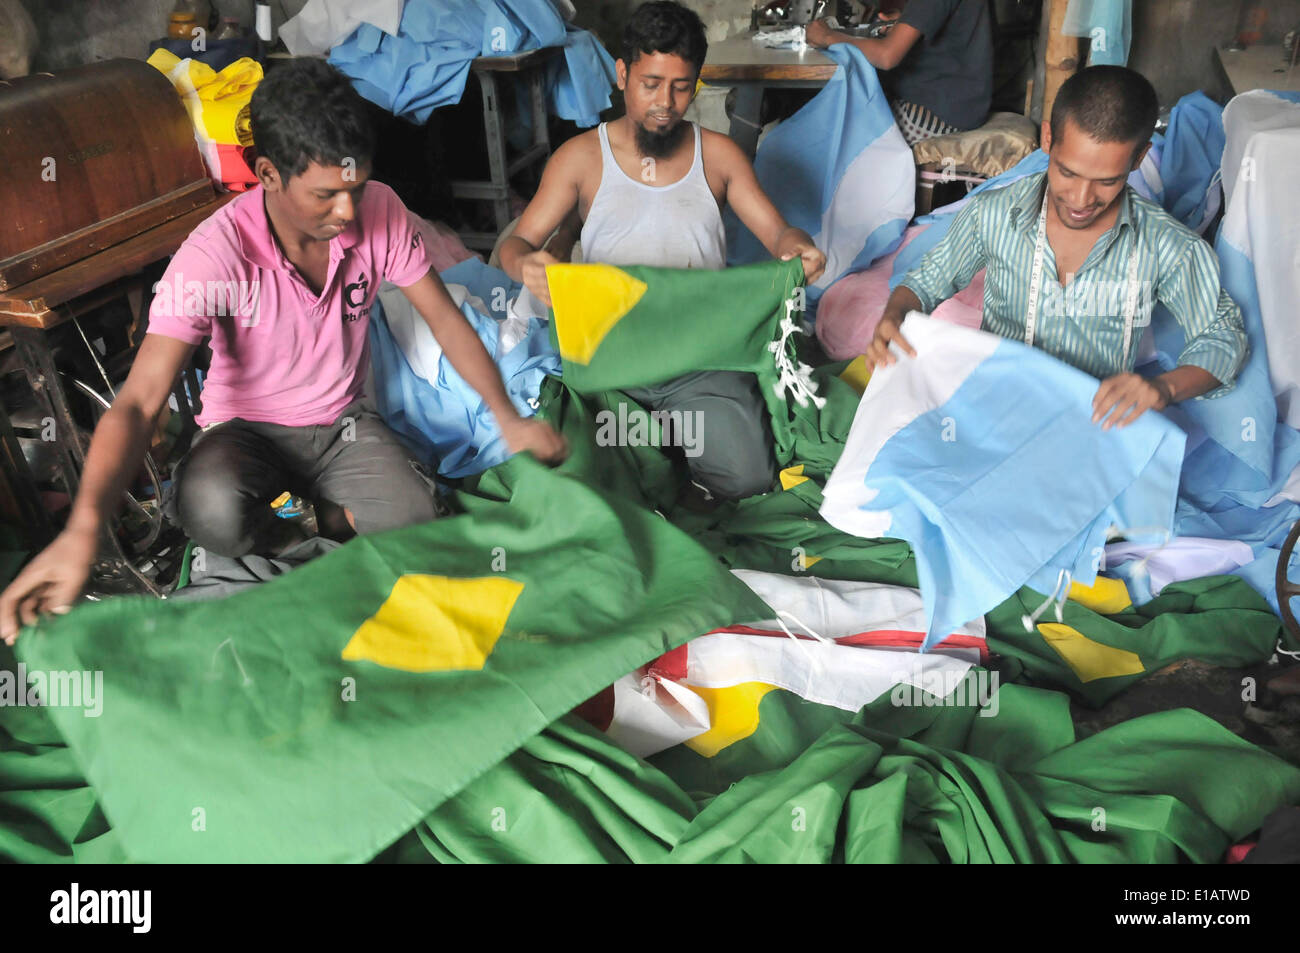 Dhaka, May 29. 12th June, 2014. Tailors are busy making flags ahead of the upcoming 2014 FIFA World Cup in Dhaka, Bangladesh, May 29, 2014. The 2014 FIFA World Cup International Football tournament will kick off in Brazil on June 12, 2014. © Shariful Islam/Xinhua/Alamy Live News Stock Photo